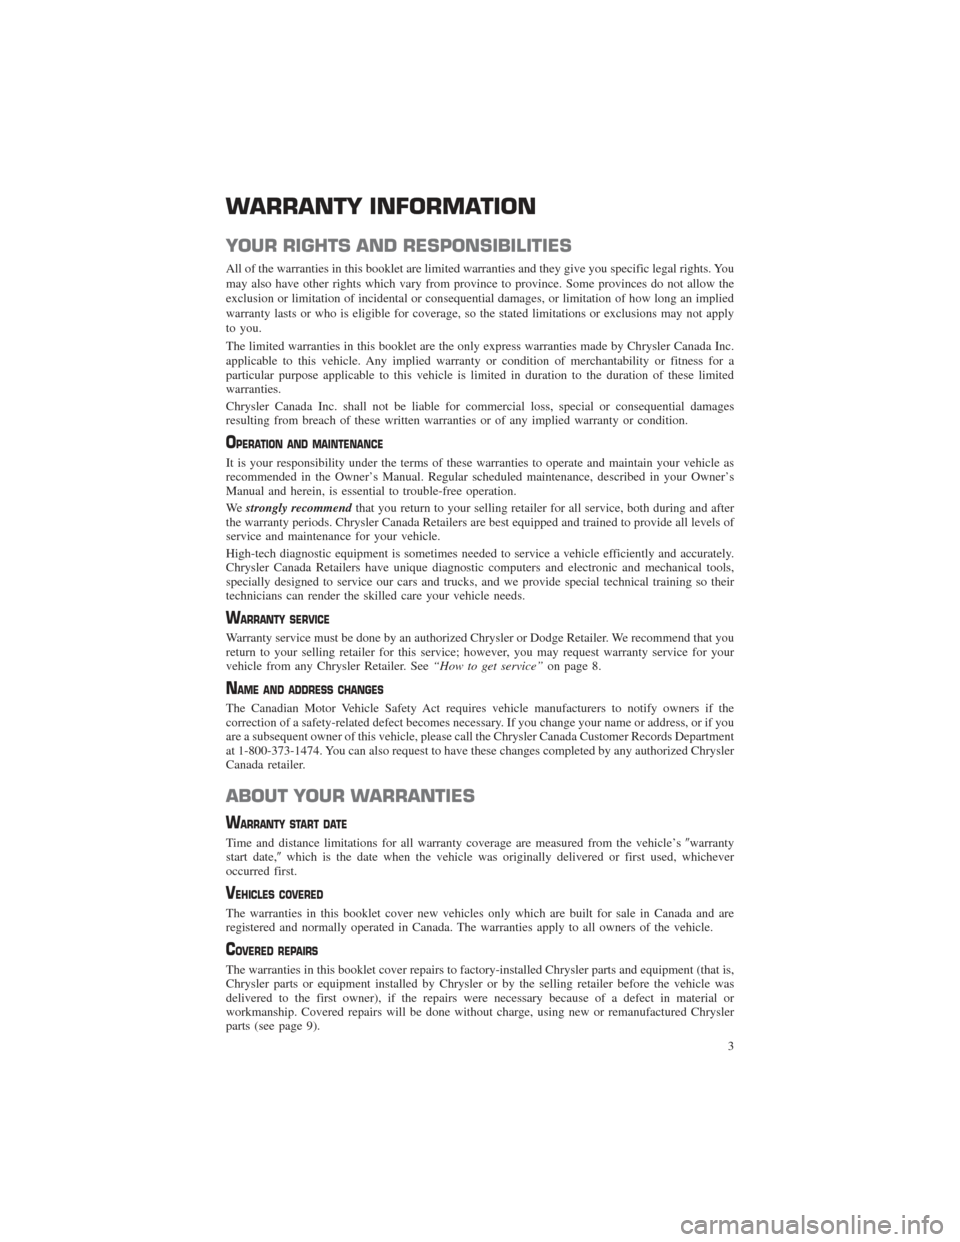 CHRYSLER 200 2015 2.G Warranty Booklet WARRANTY INFORMATION
YOUR RIGHTS AND RESPONSIBILITIES
All of the warranties in this booklet are limited warranties and they give you specific legal rights. You
may also have other rights which vary fr